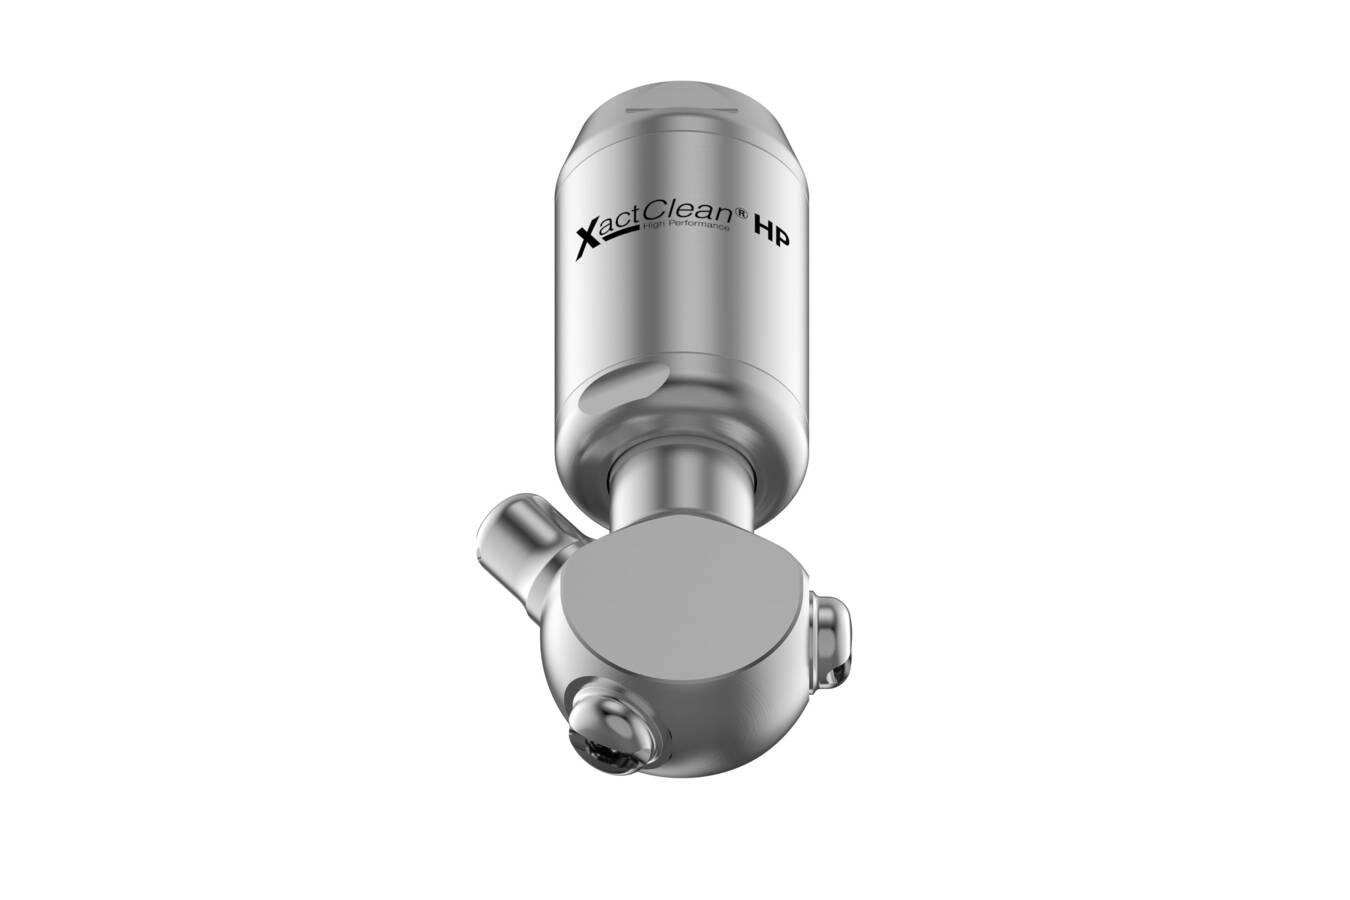 Suitable rotating cleaning nozzle type Lechler XactClean® HP for cleaning of large mixing vessels. 